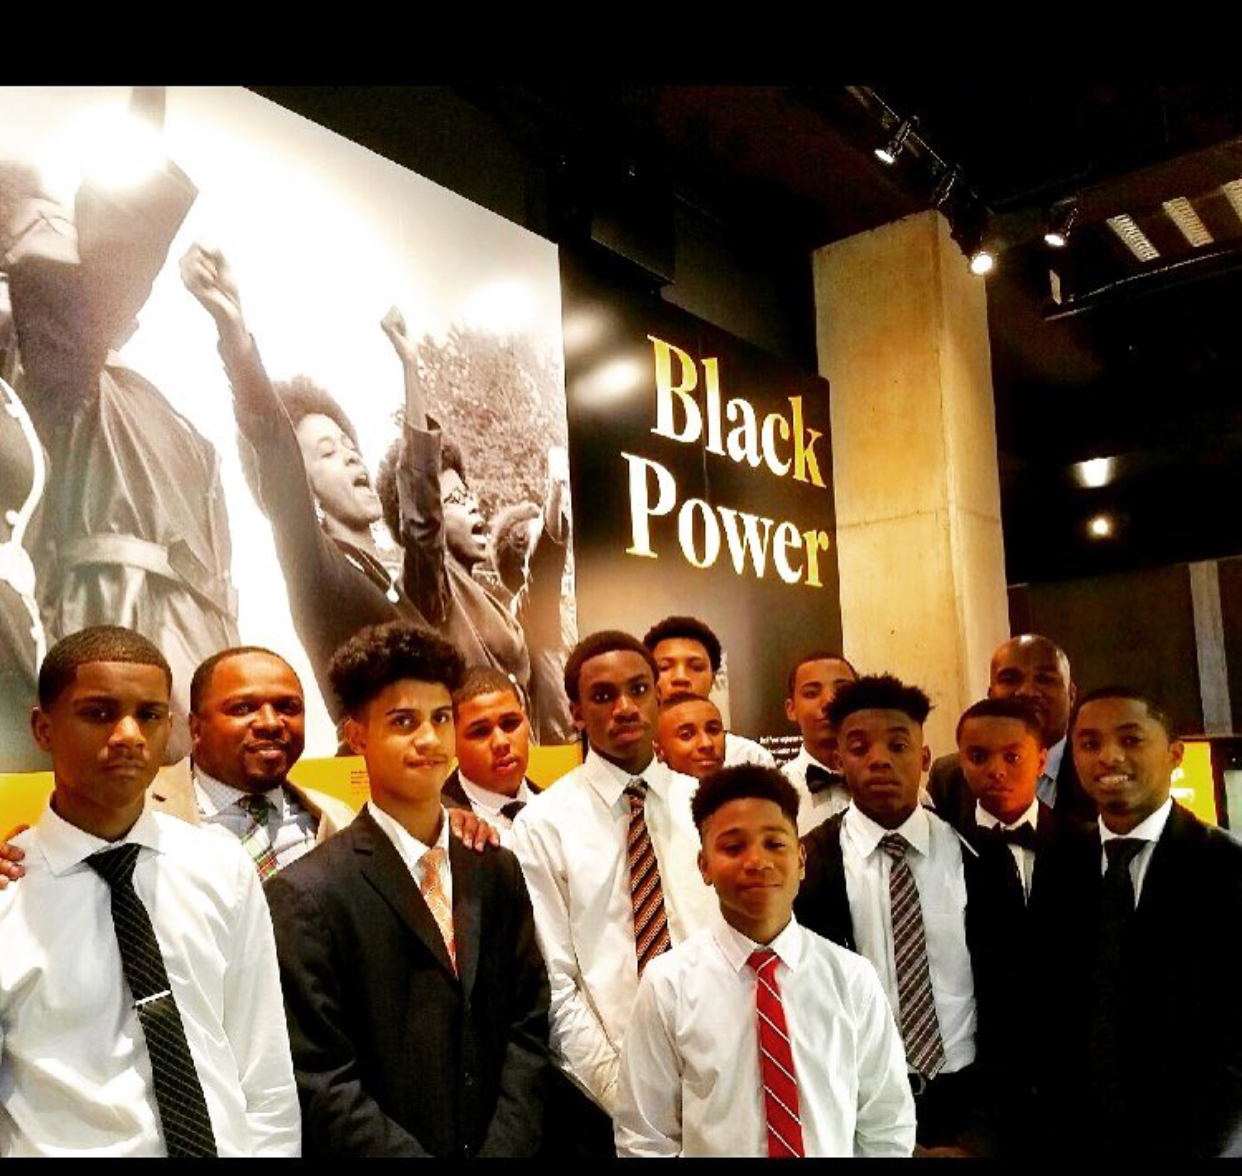 A group of young Black men in suits and ties pose for a photo in front of a large image with the words "Black Power."